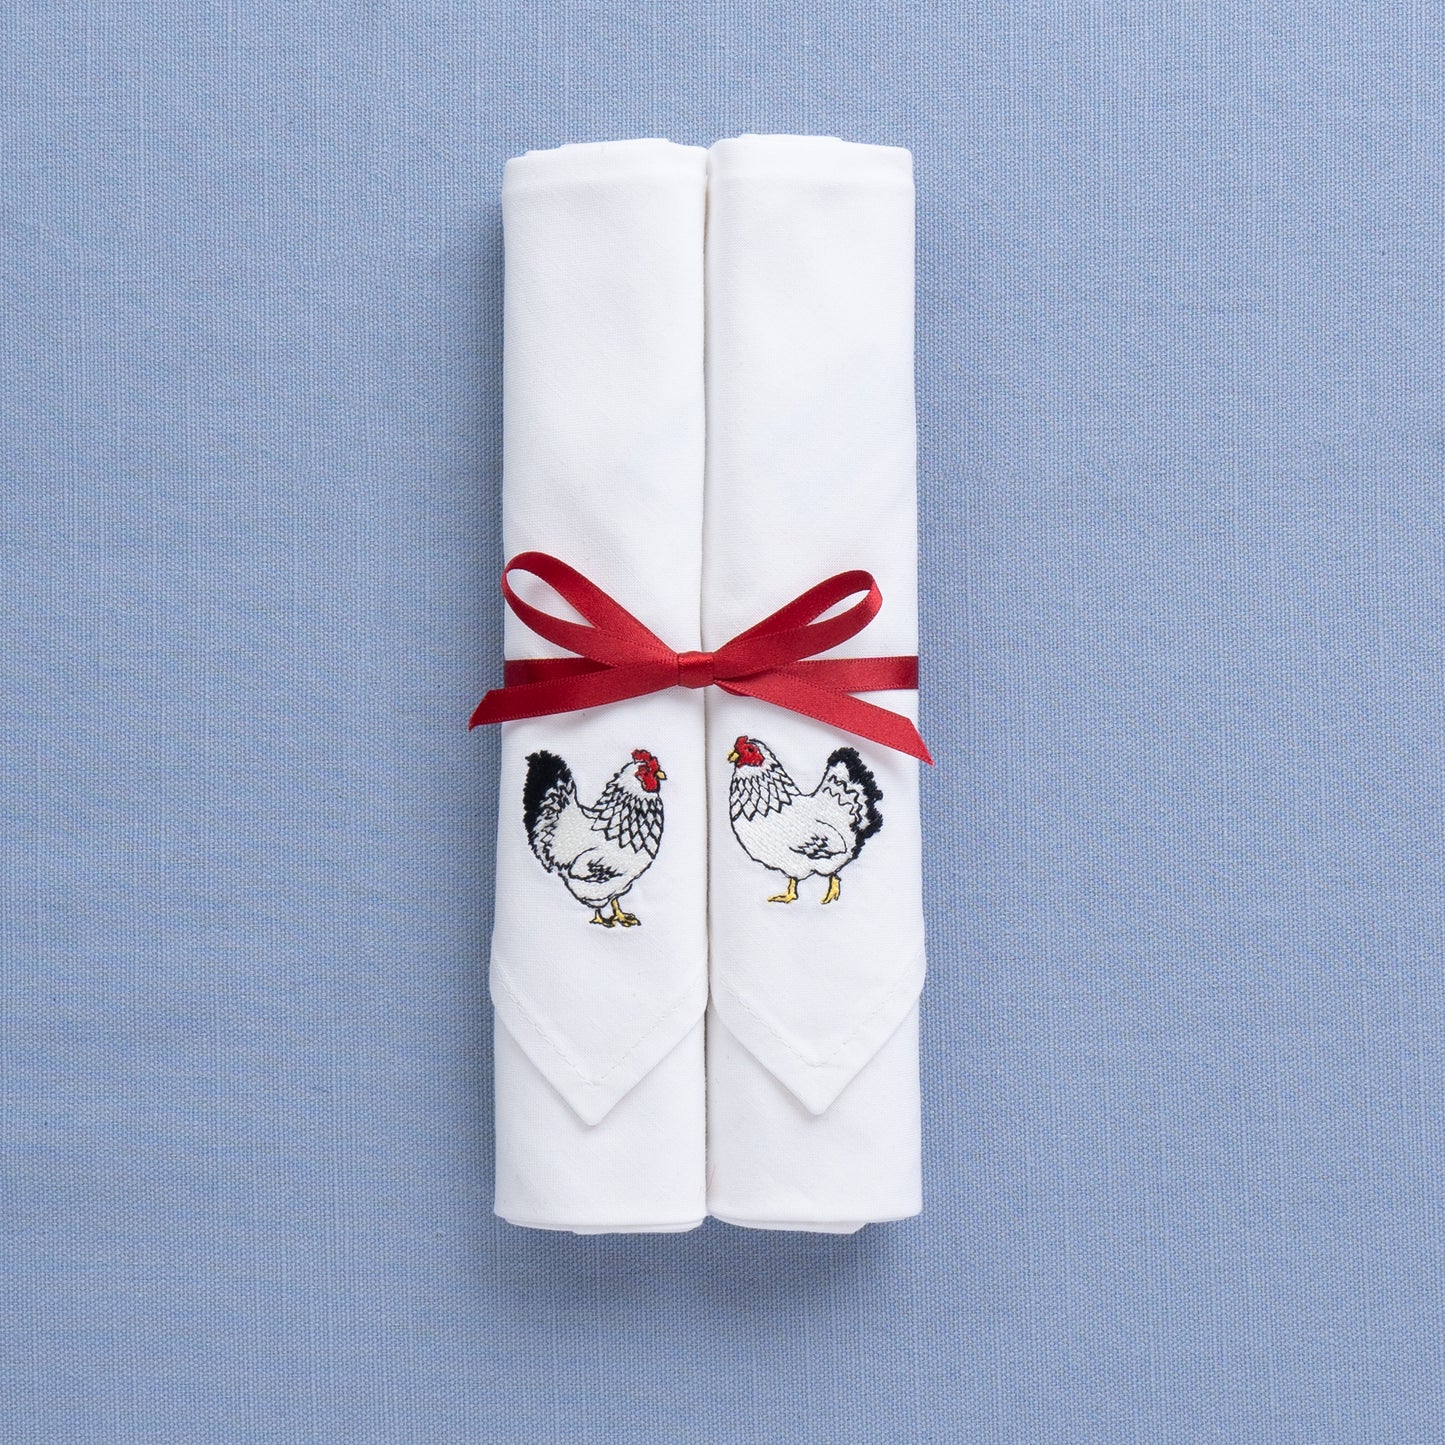 Second - Embroidered Mr & Mrs Chicken Napkins - Set of Two